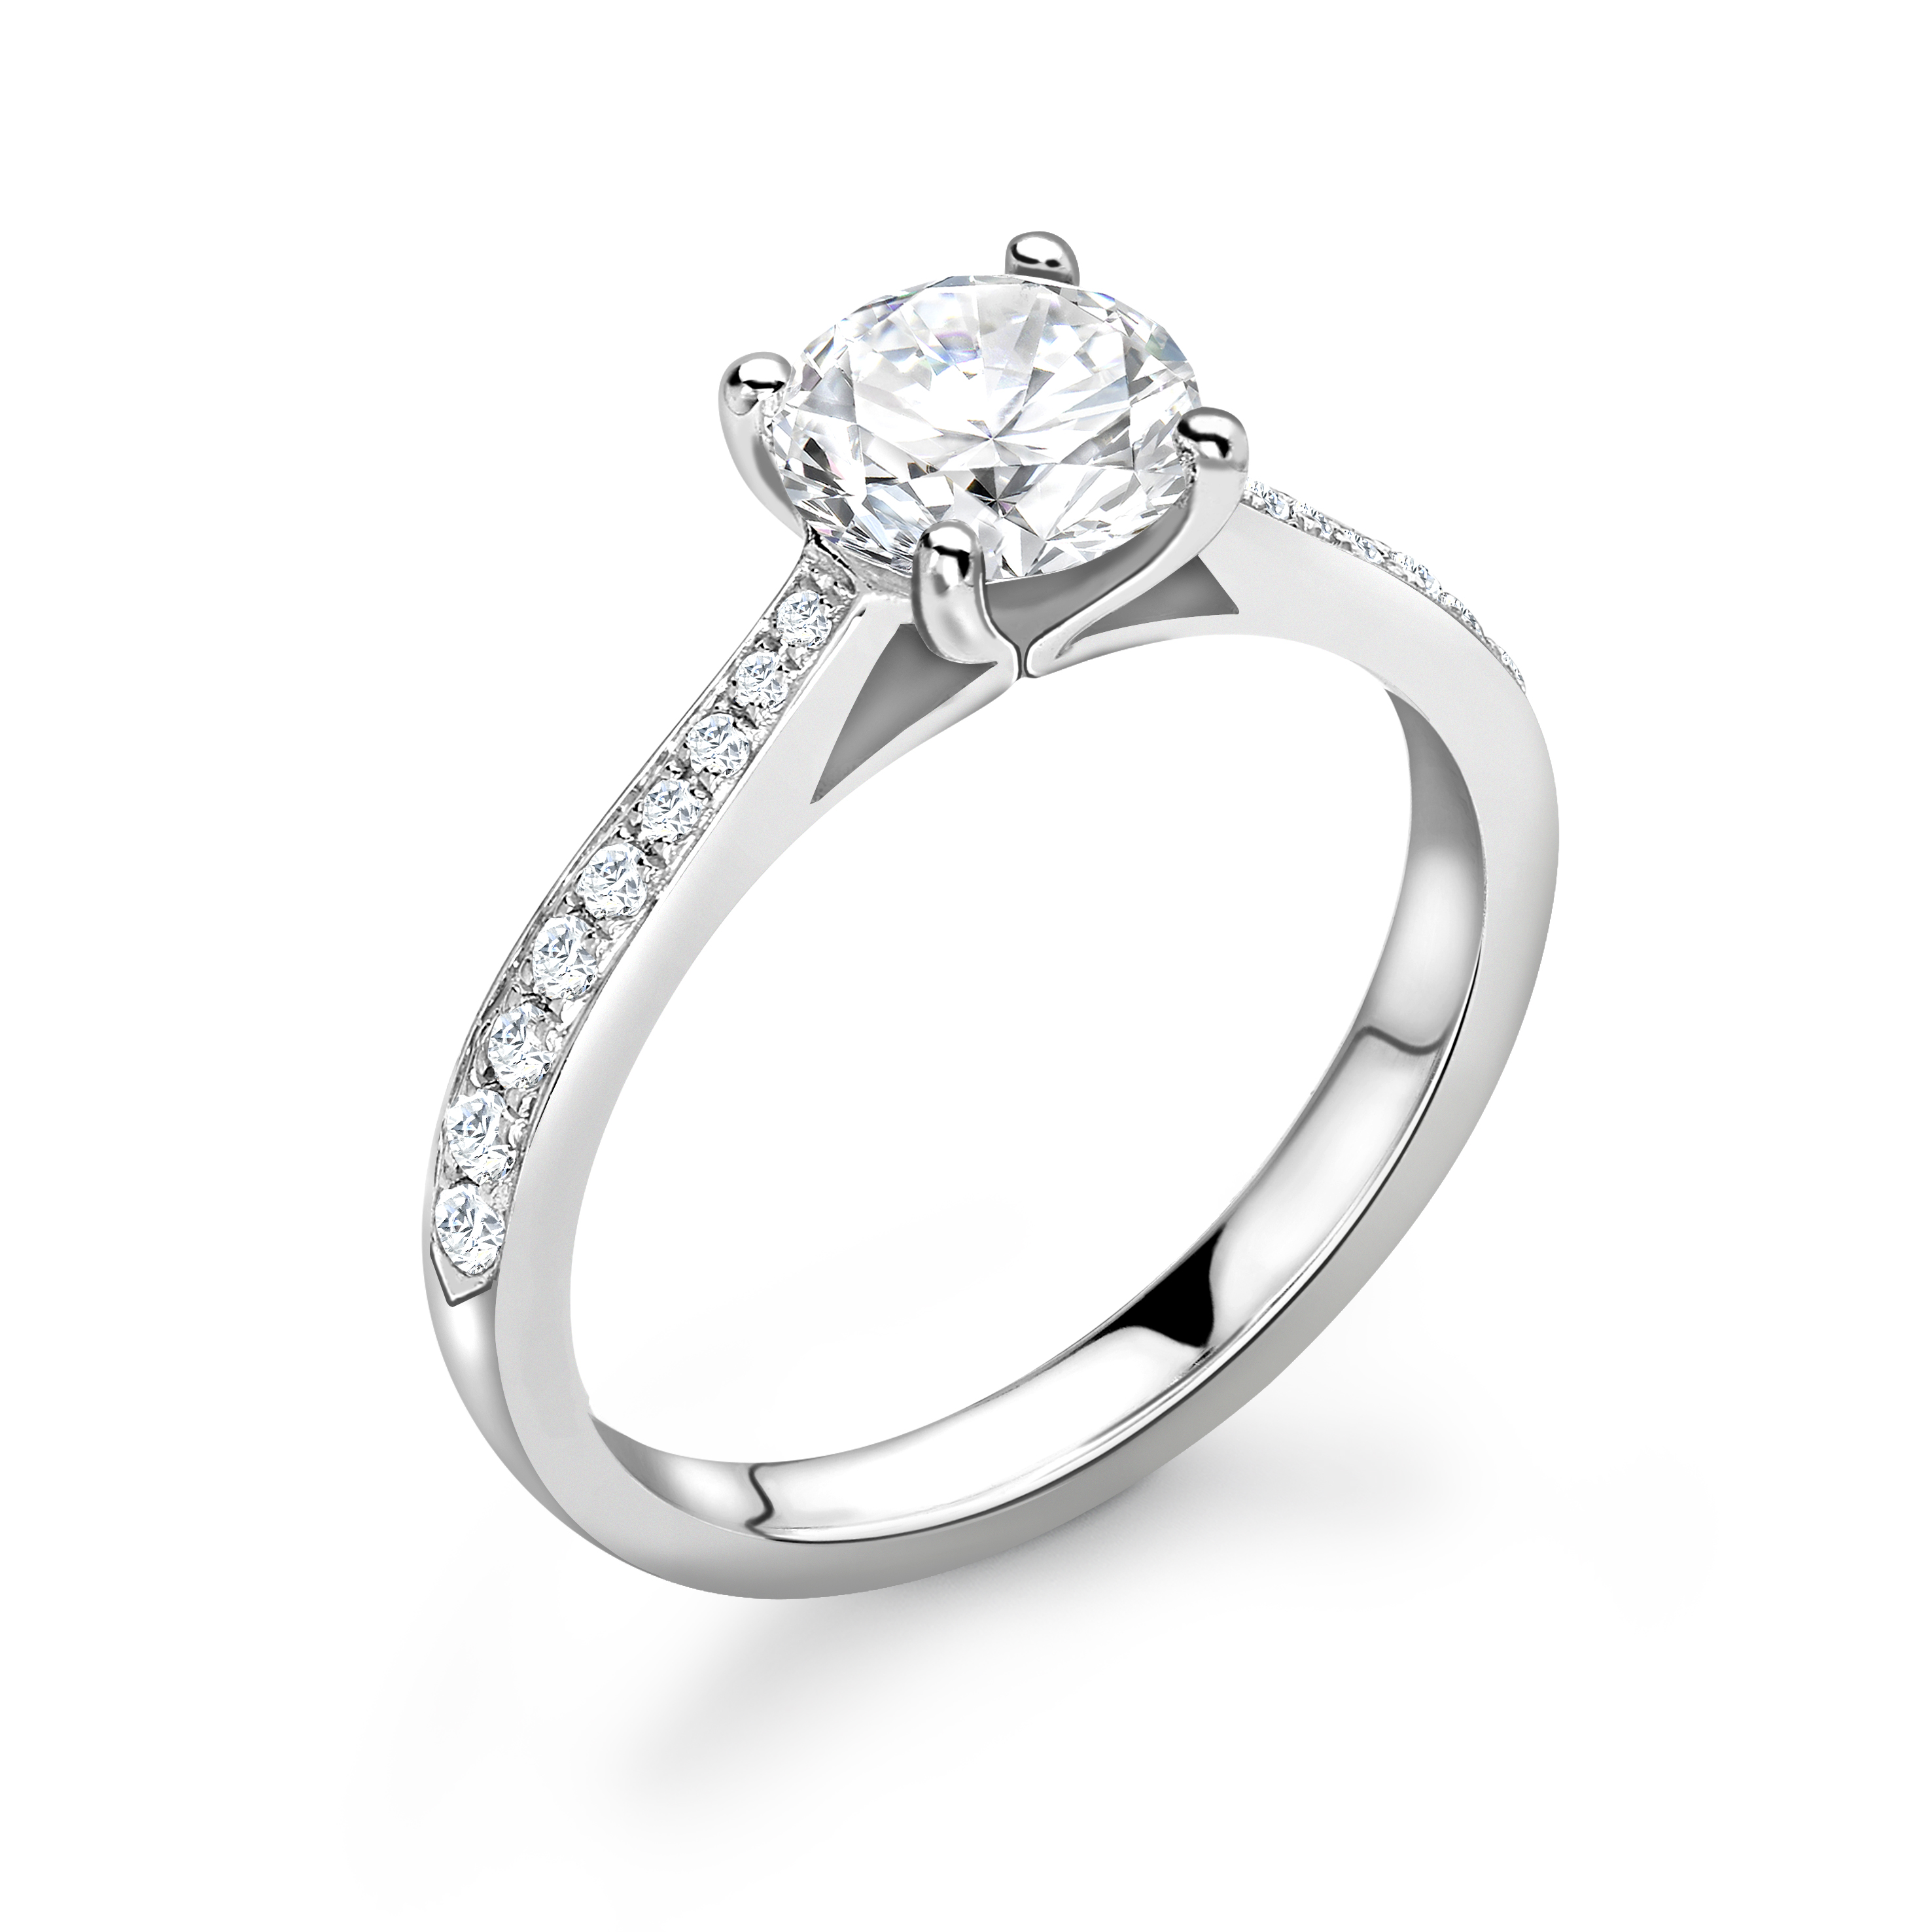 Delicate Pave Setting Shoulder Diamond Engagement Ring